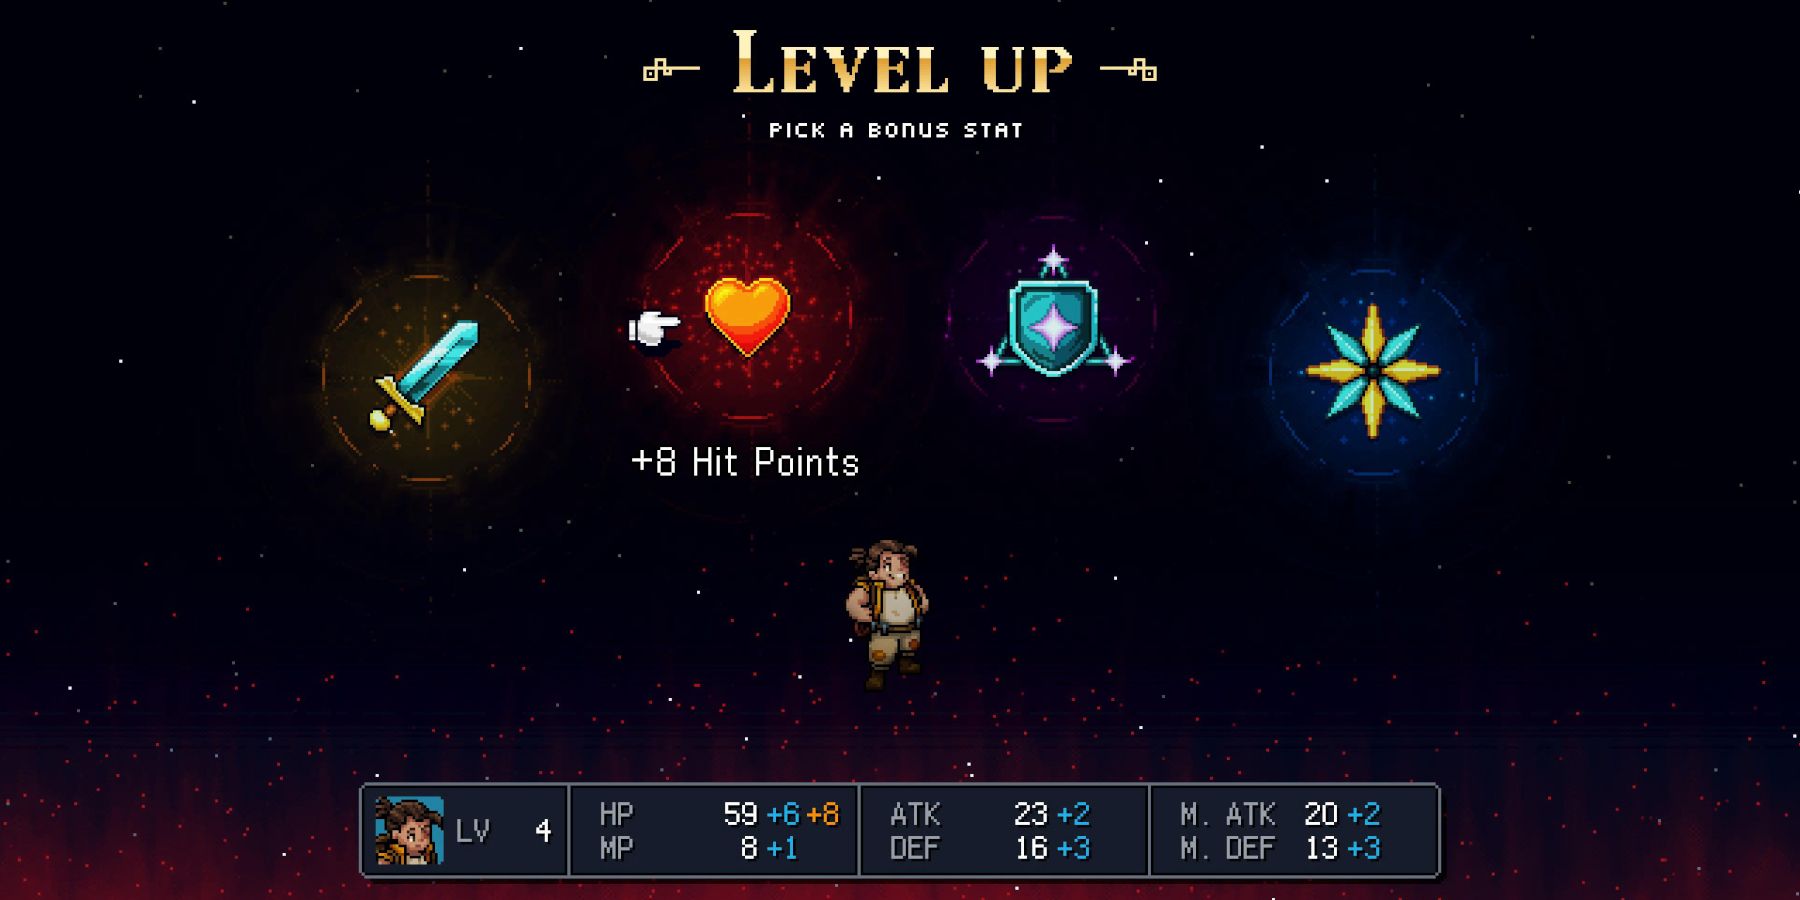 Sea Of Stars - A Guide To The Level Cap & Best Bonus Stats